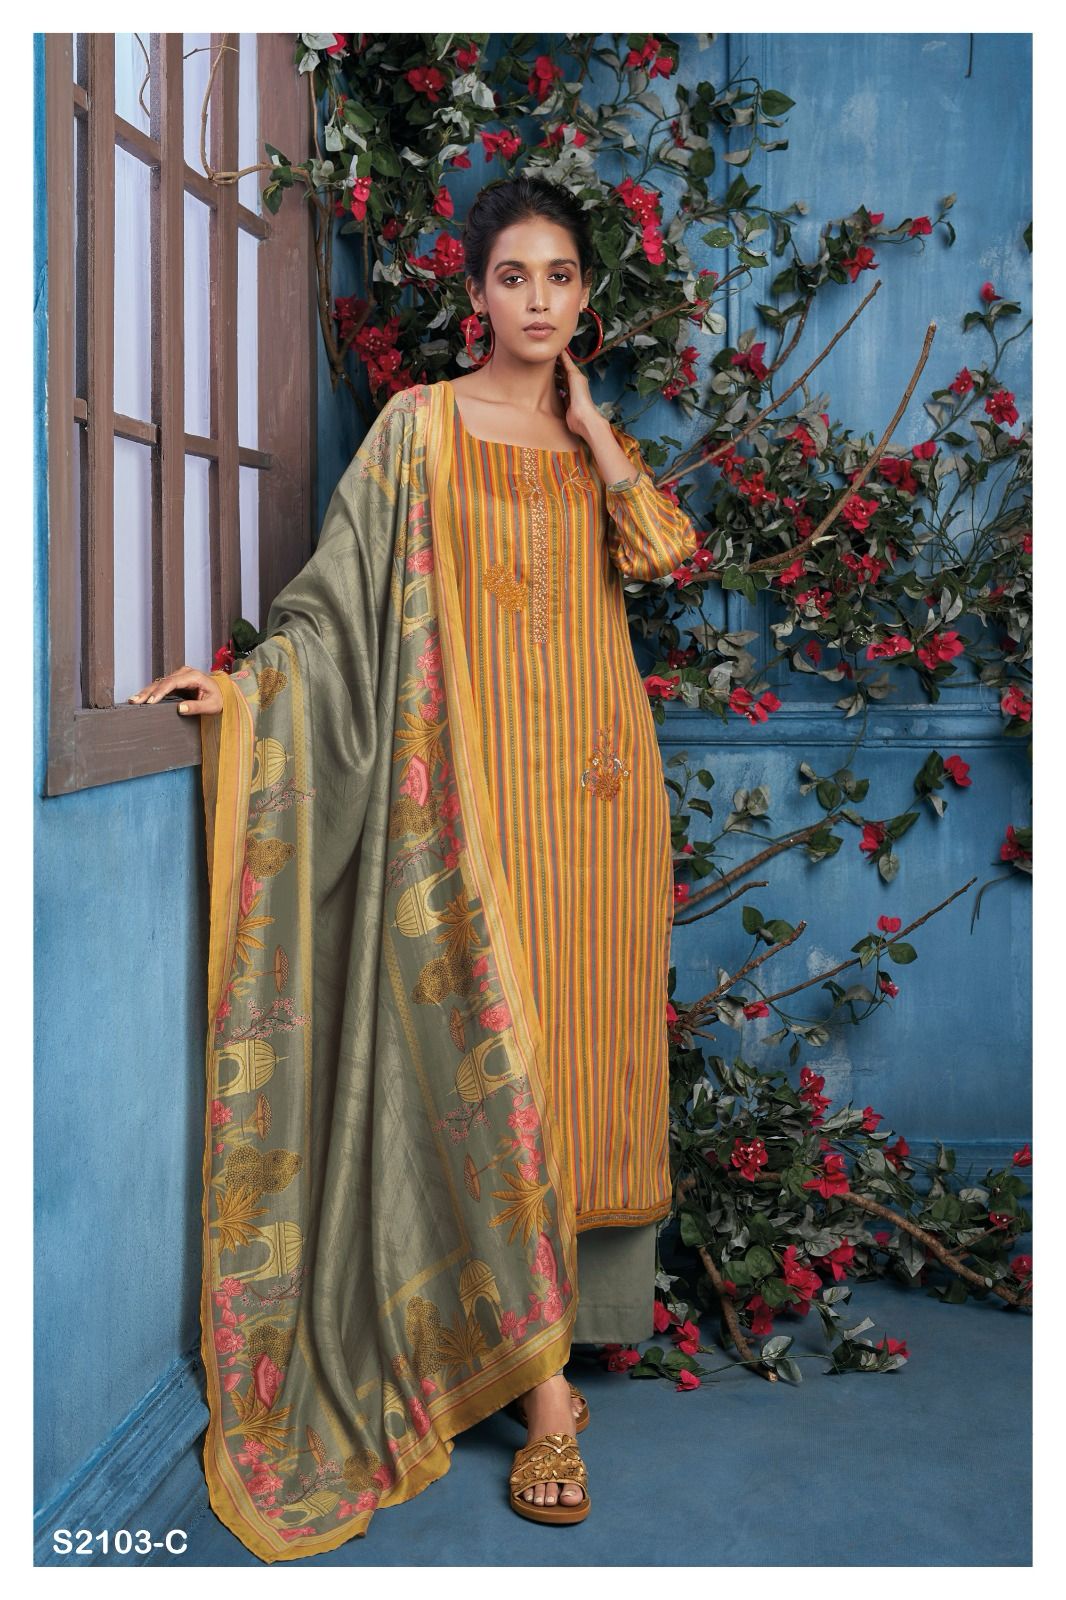 Claire 2103 Ganga Cotton Silk Plazzo Style Suits